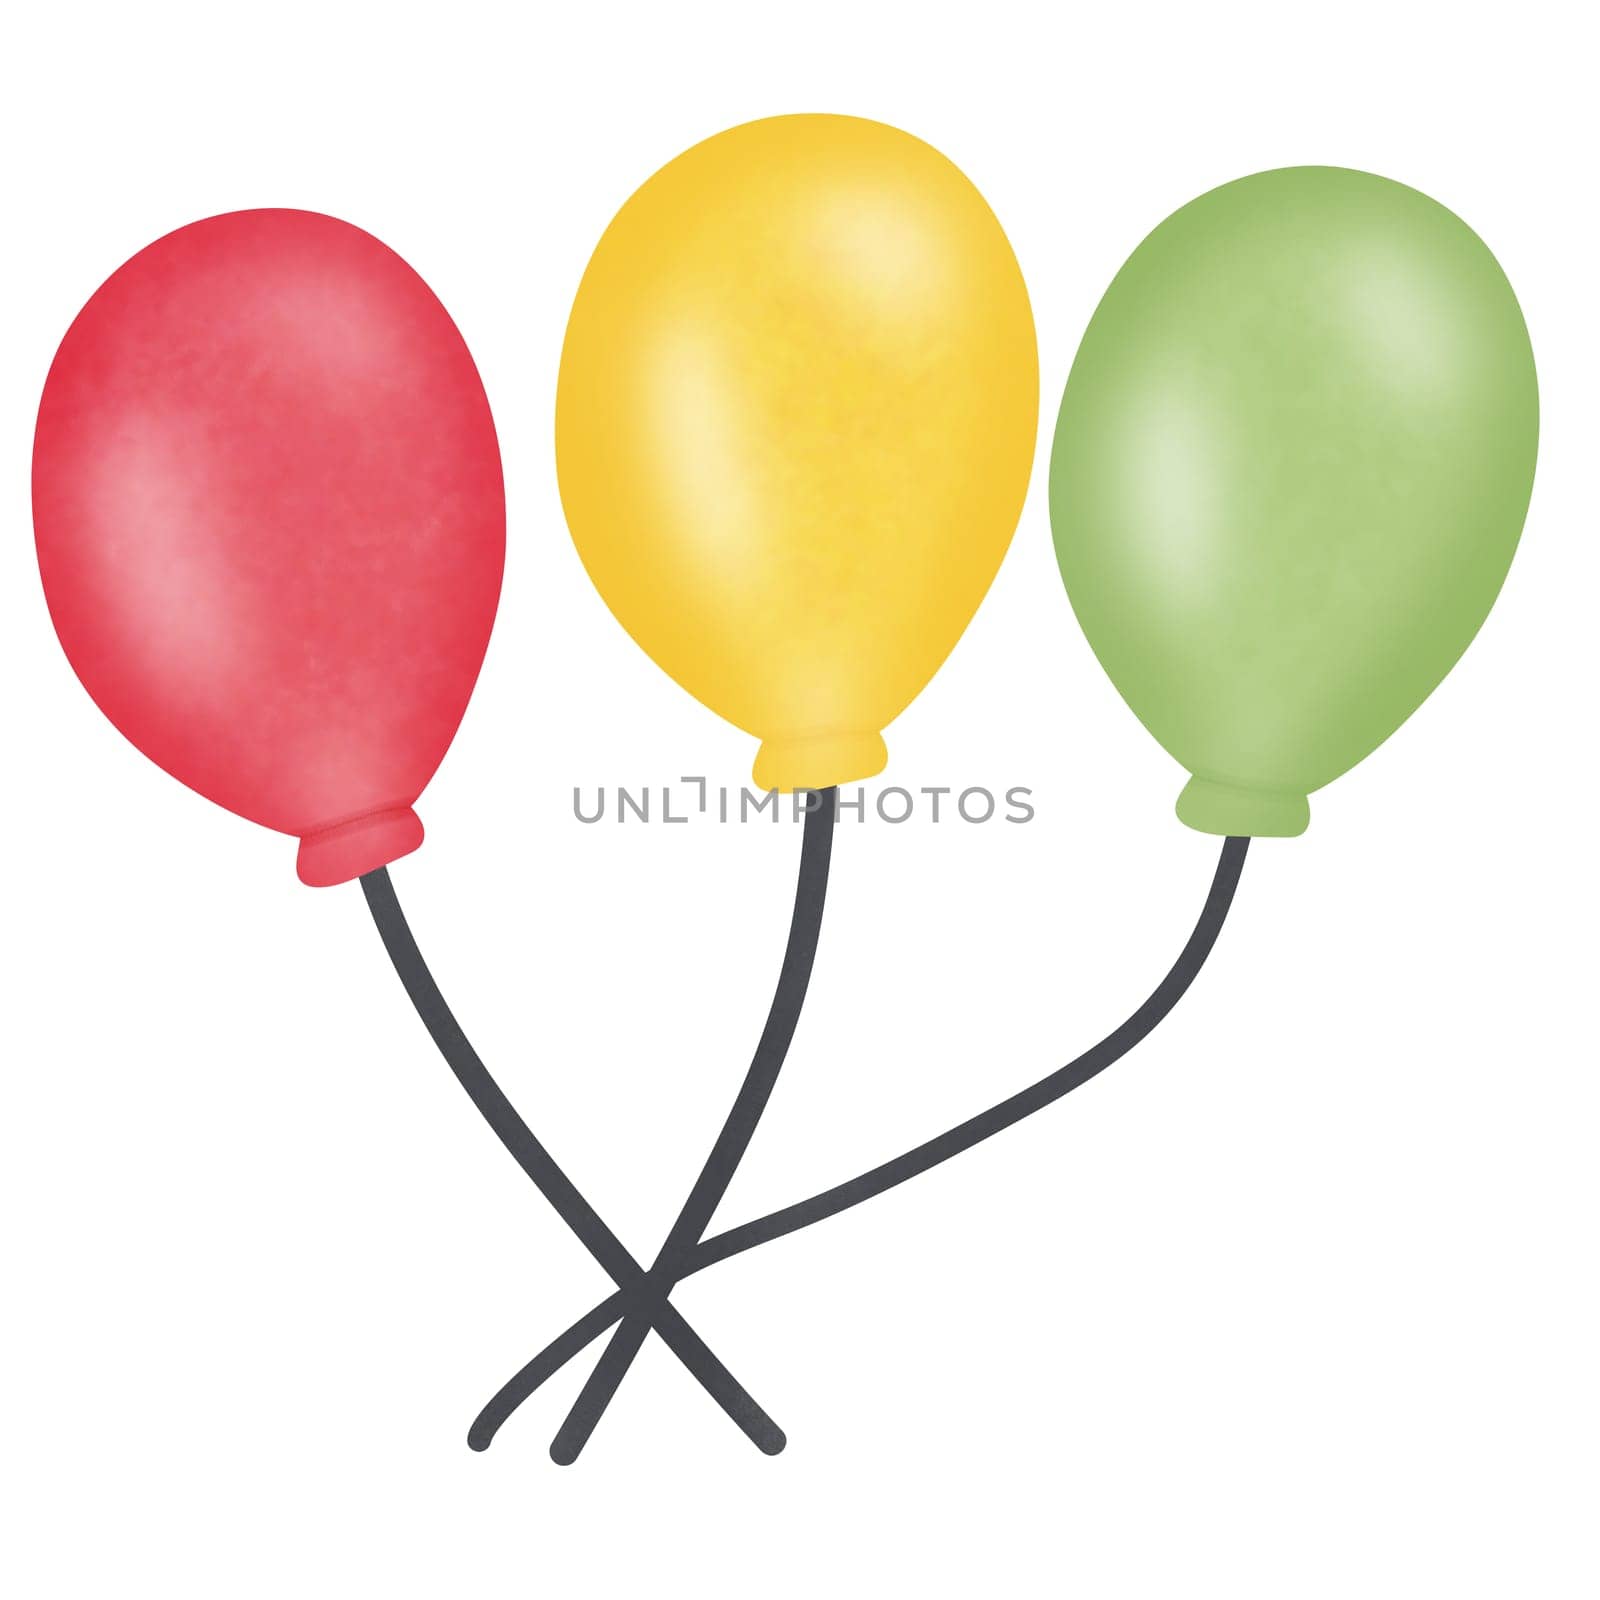 Drawing of colorful of balloon isolated on white background for usage as an illustration and a decorative element